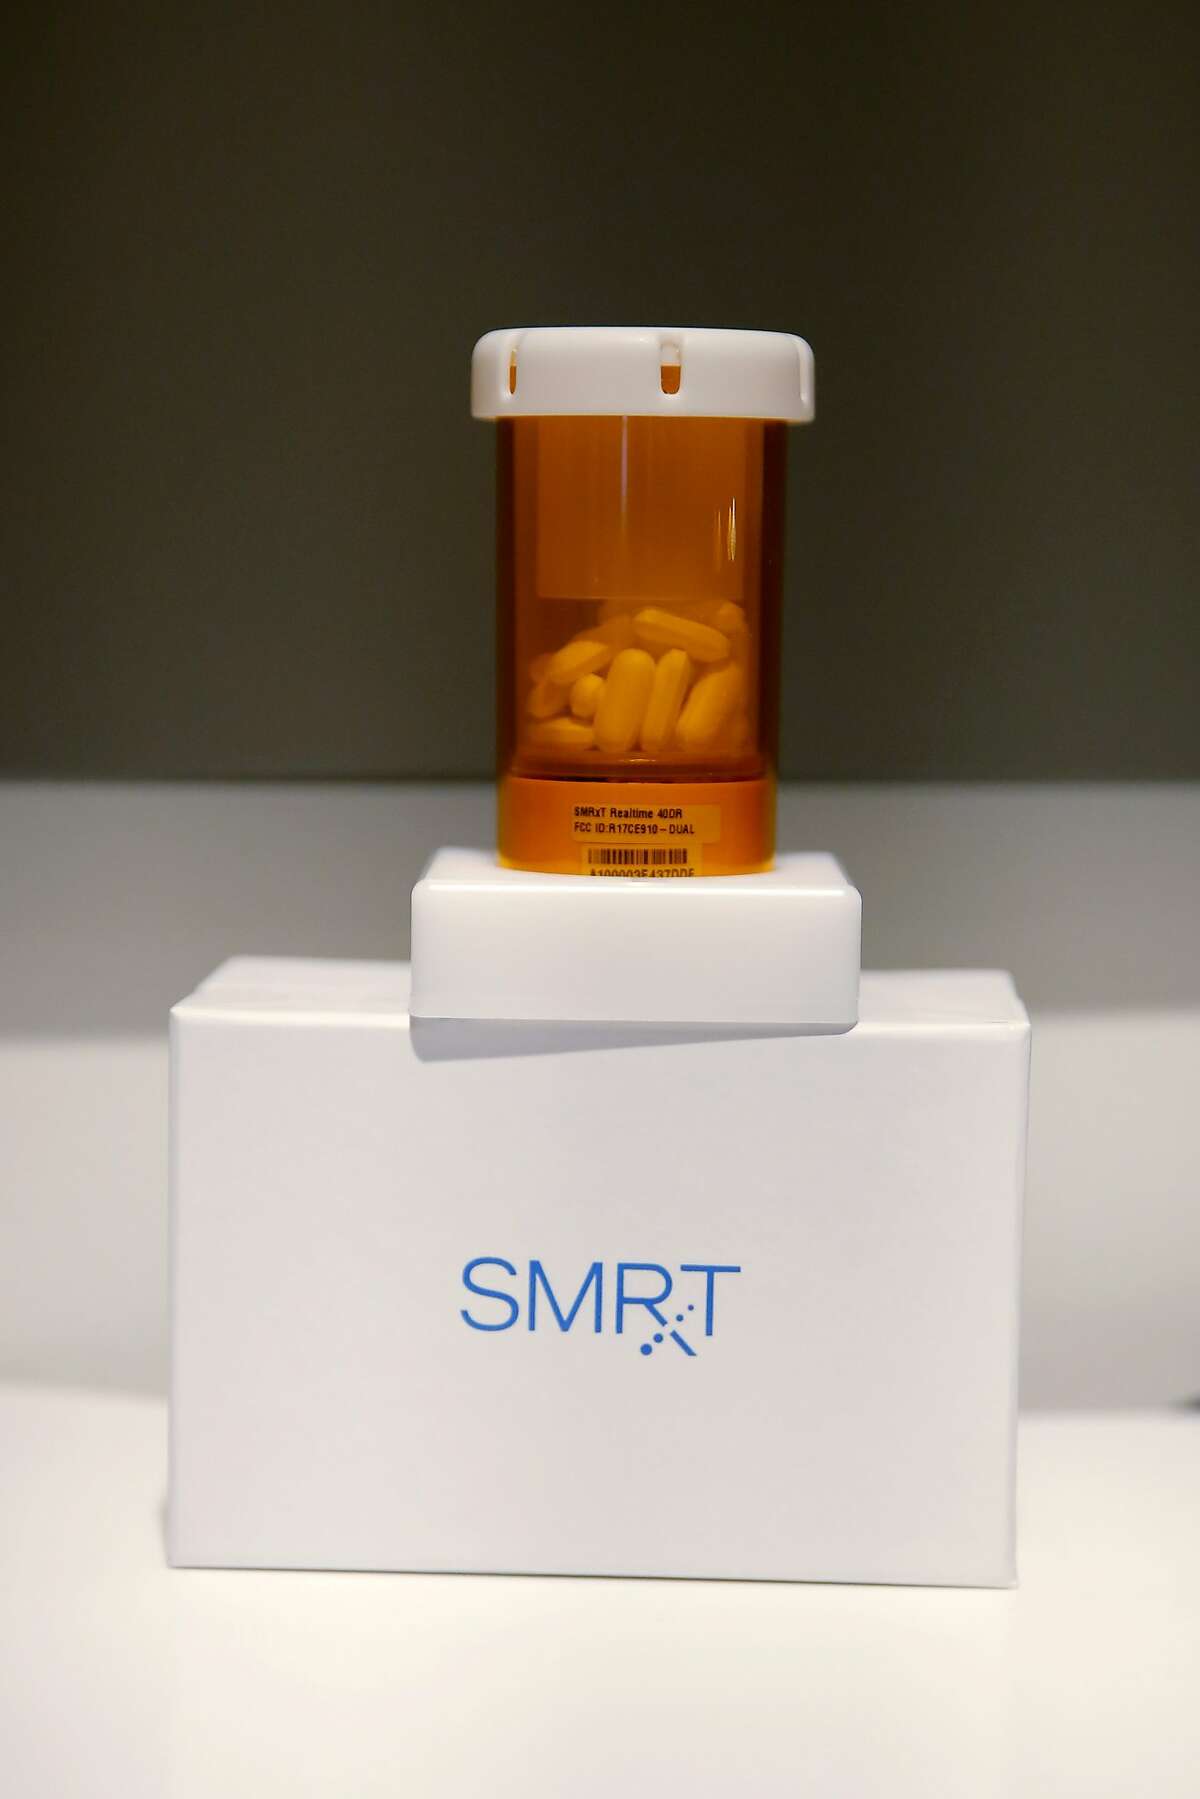 A SMRxT smart prescription bottle on display during a Verizon demonstration of products using the Internet of Things in San Francisco, California, on Wednesday, Oct. 28, 2015.